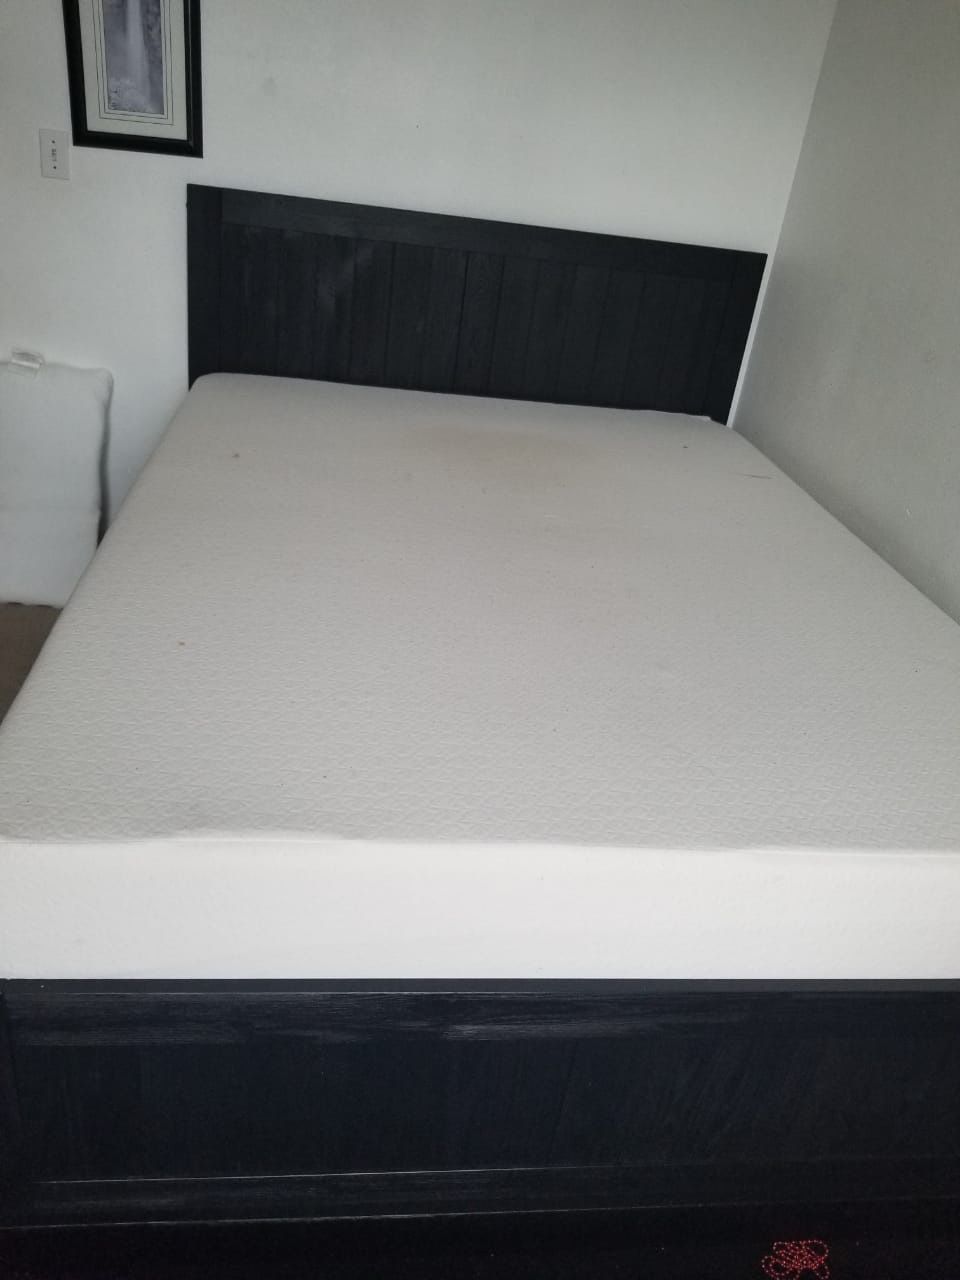 Queen size bed frame with drawers and mattress included